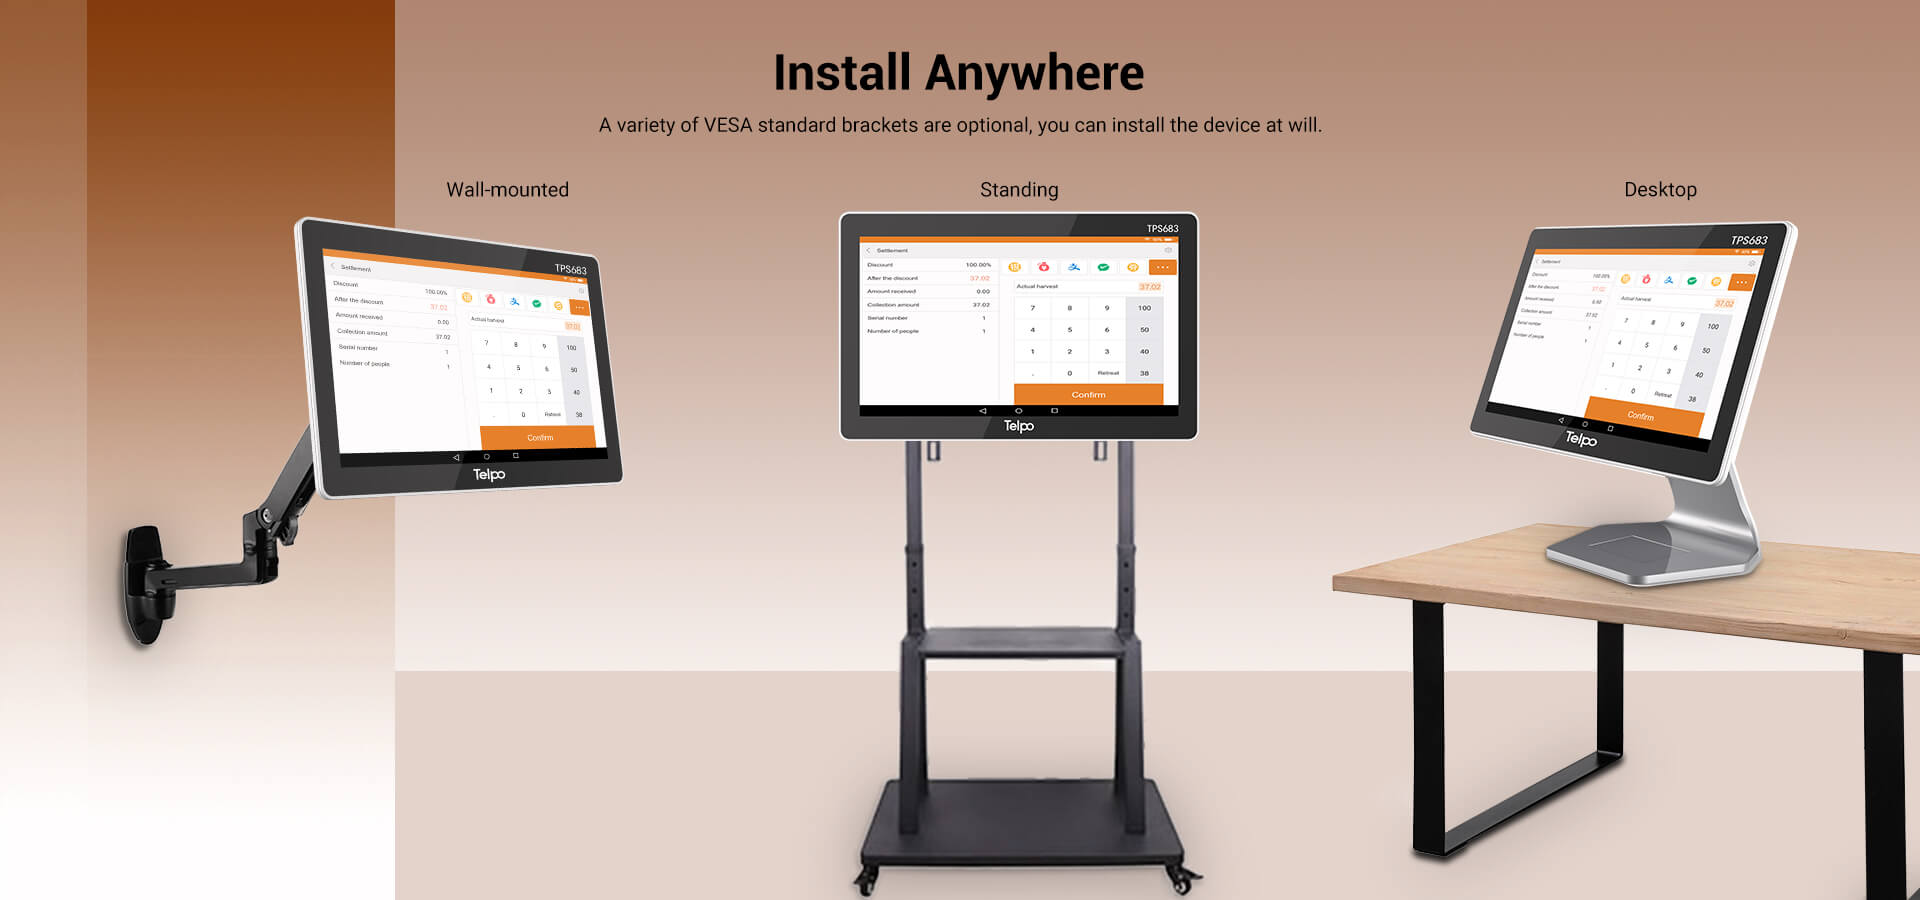 Telpo TPS683 can be used as Desktop POS, Wall-mounted pos, kitchen display wiht Arm, Standing touch screen monitor 